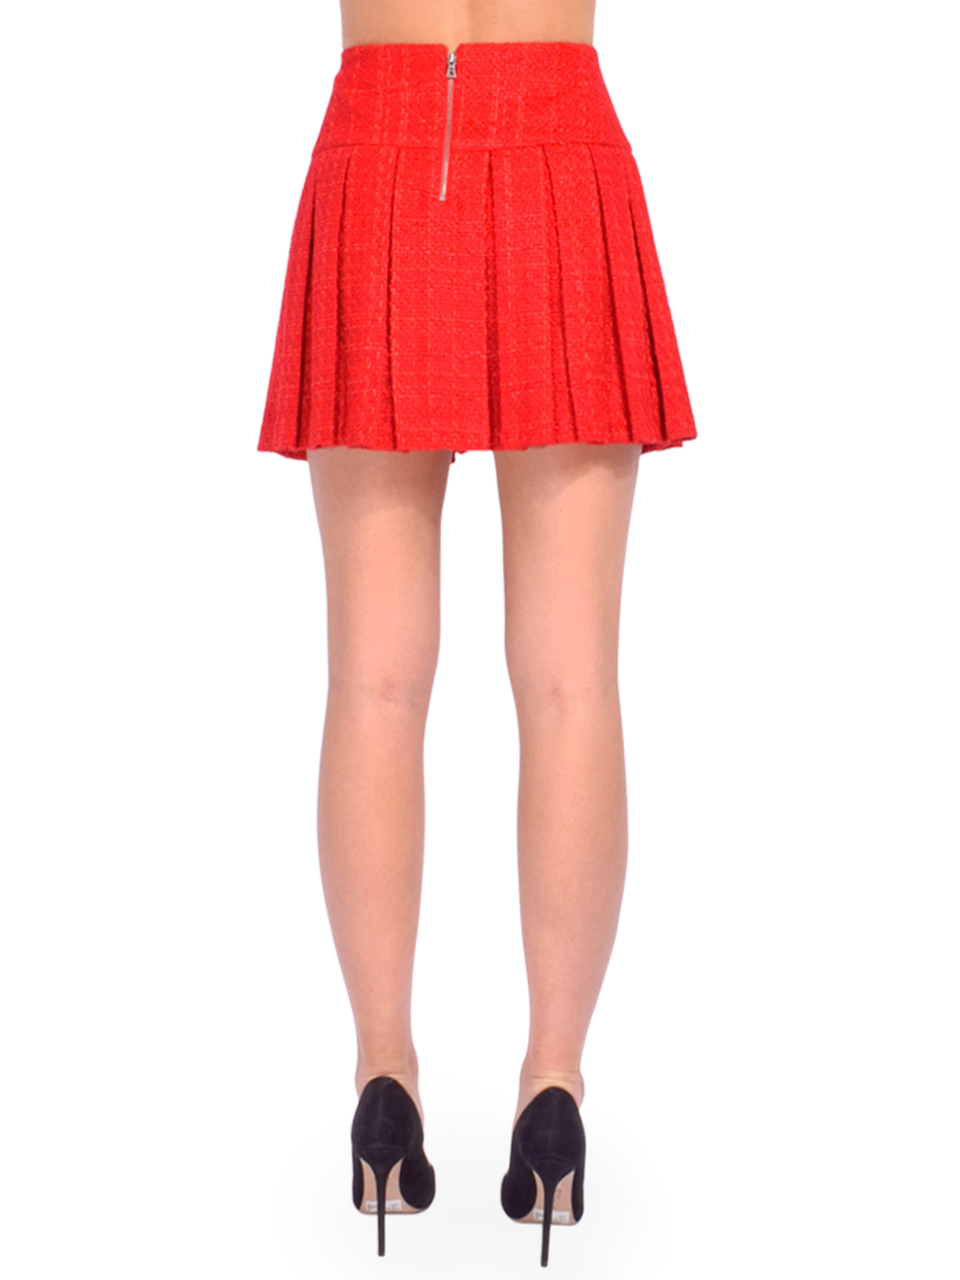 ALICE + OLIVIA Emilie Box Pleated Tweed Mini Skirt in Bright Ruby Back View 